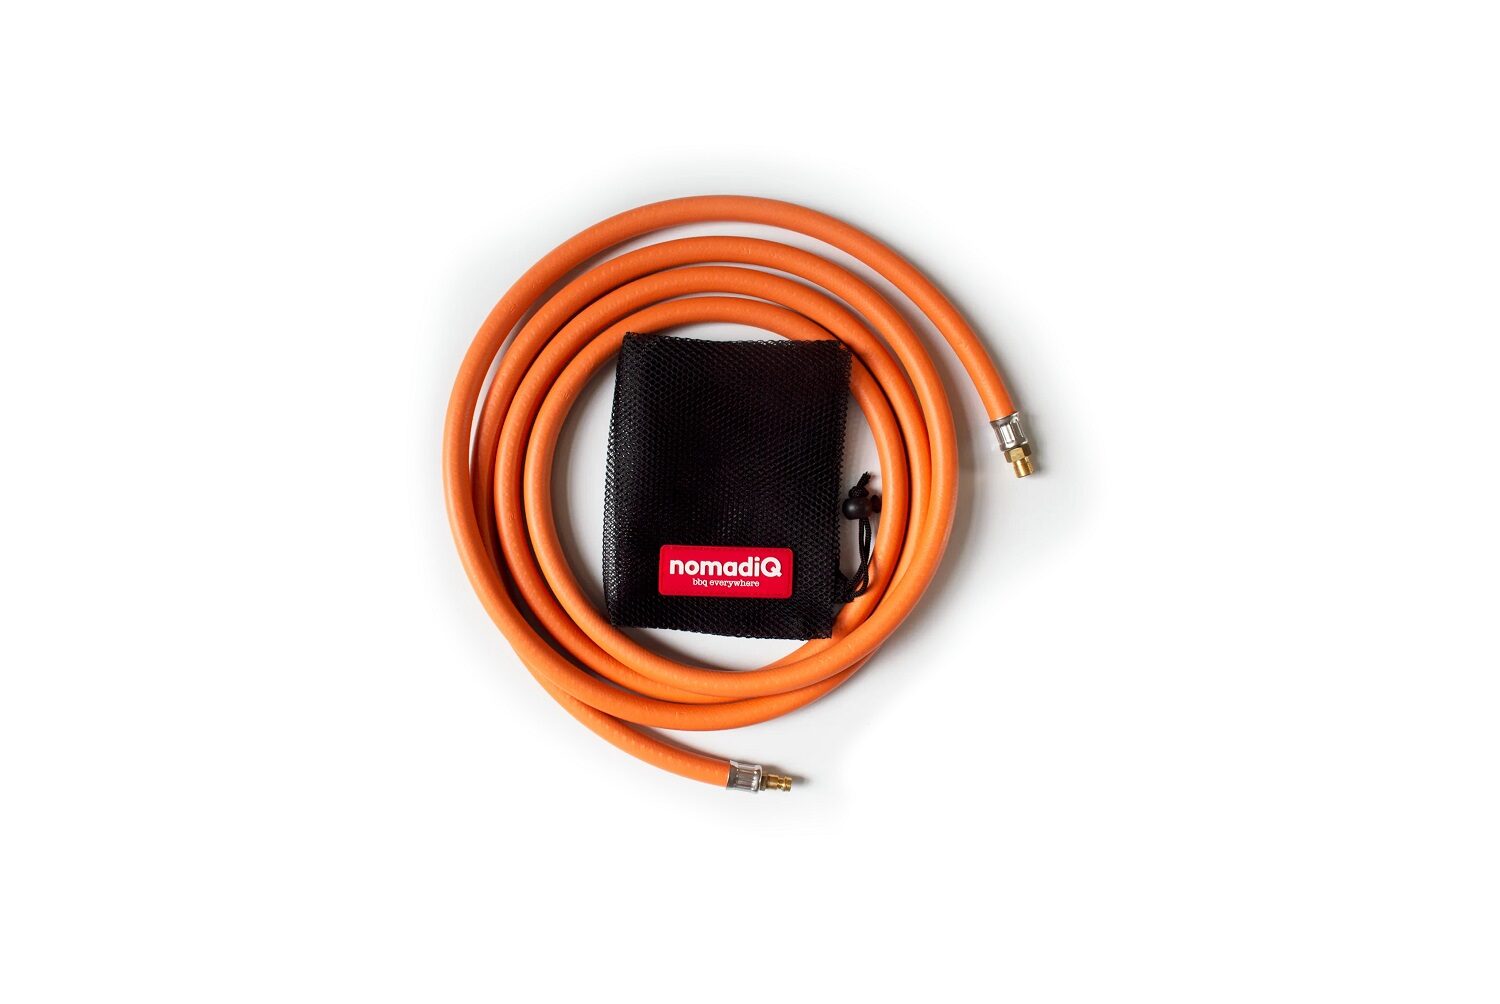 Nomadiq Extended Gas Hose Motorhome Connection Studio front